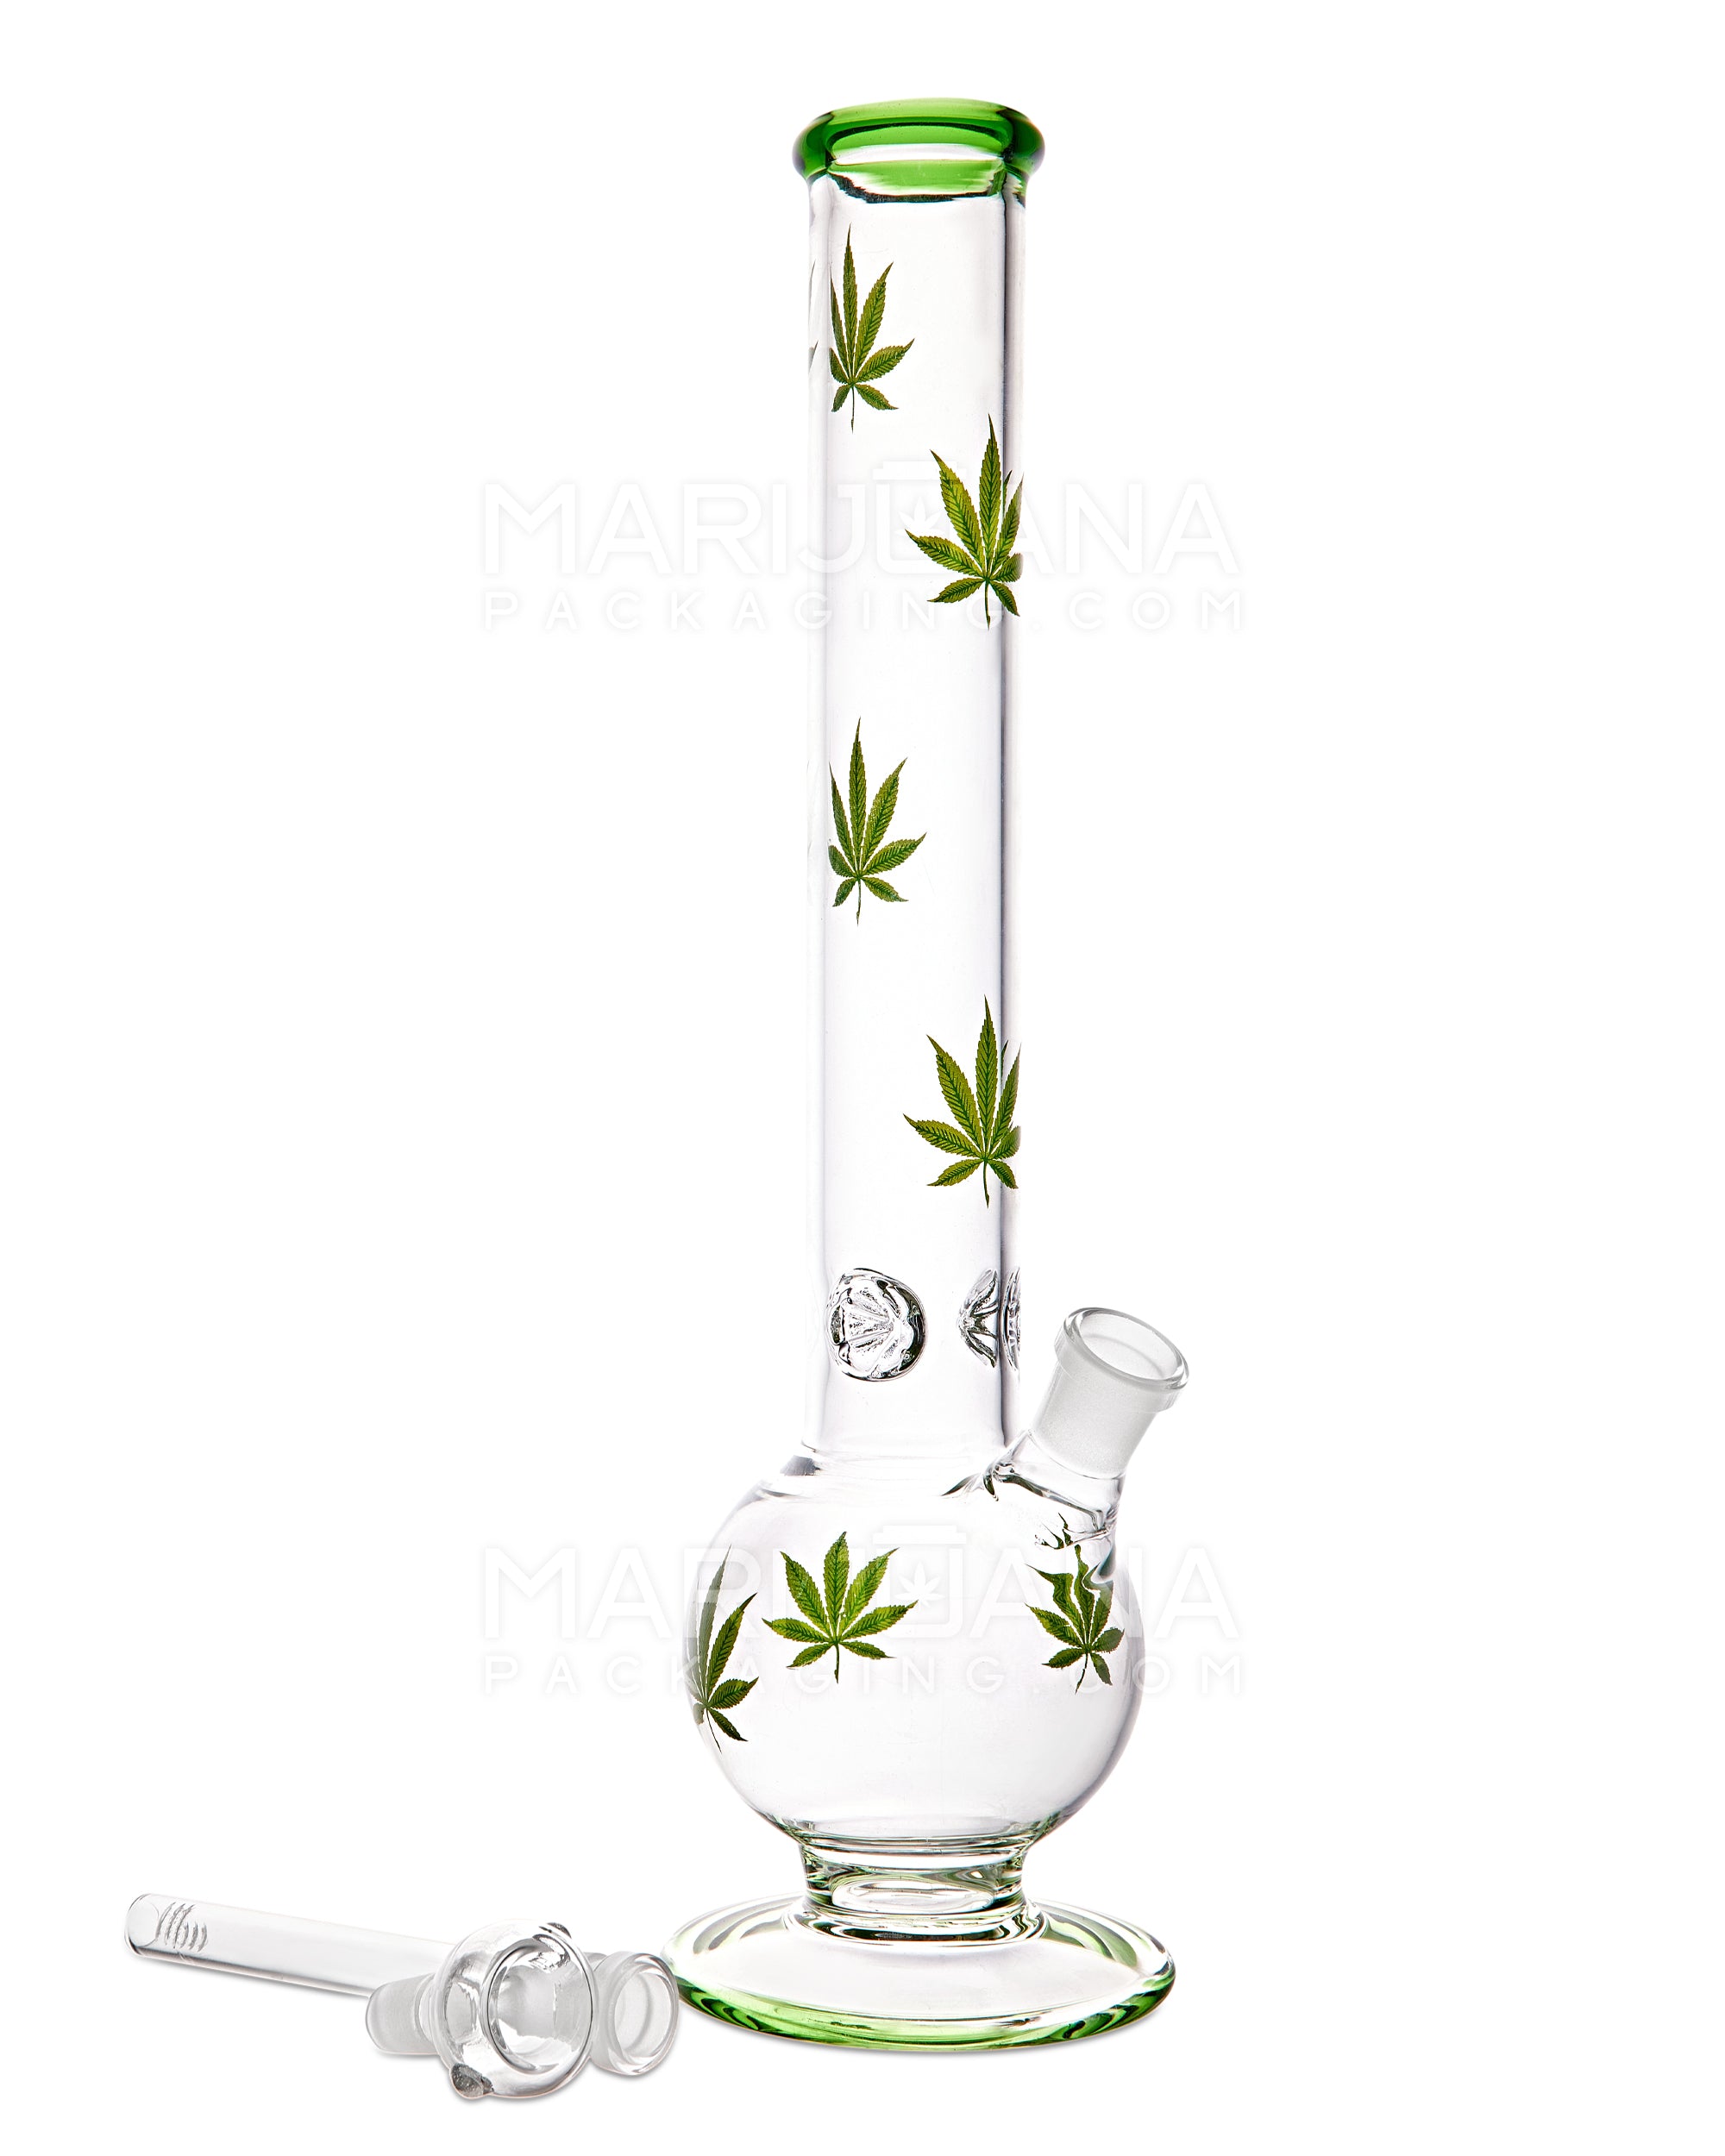 Straight Neck Decal Diffused Downstem Glass Egg Water Pipe w/ Ice Catcher | 14in Tall - 18mm Bowl - Green - 2